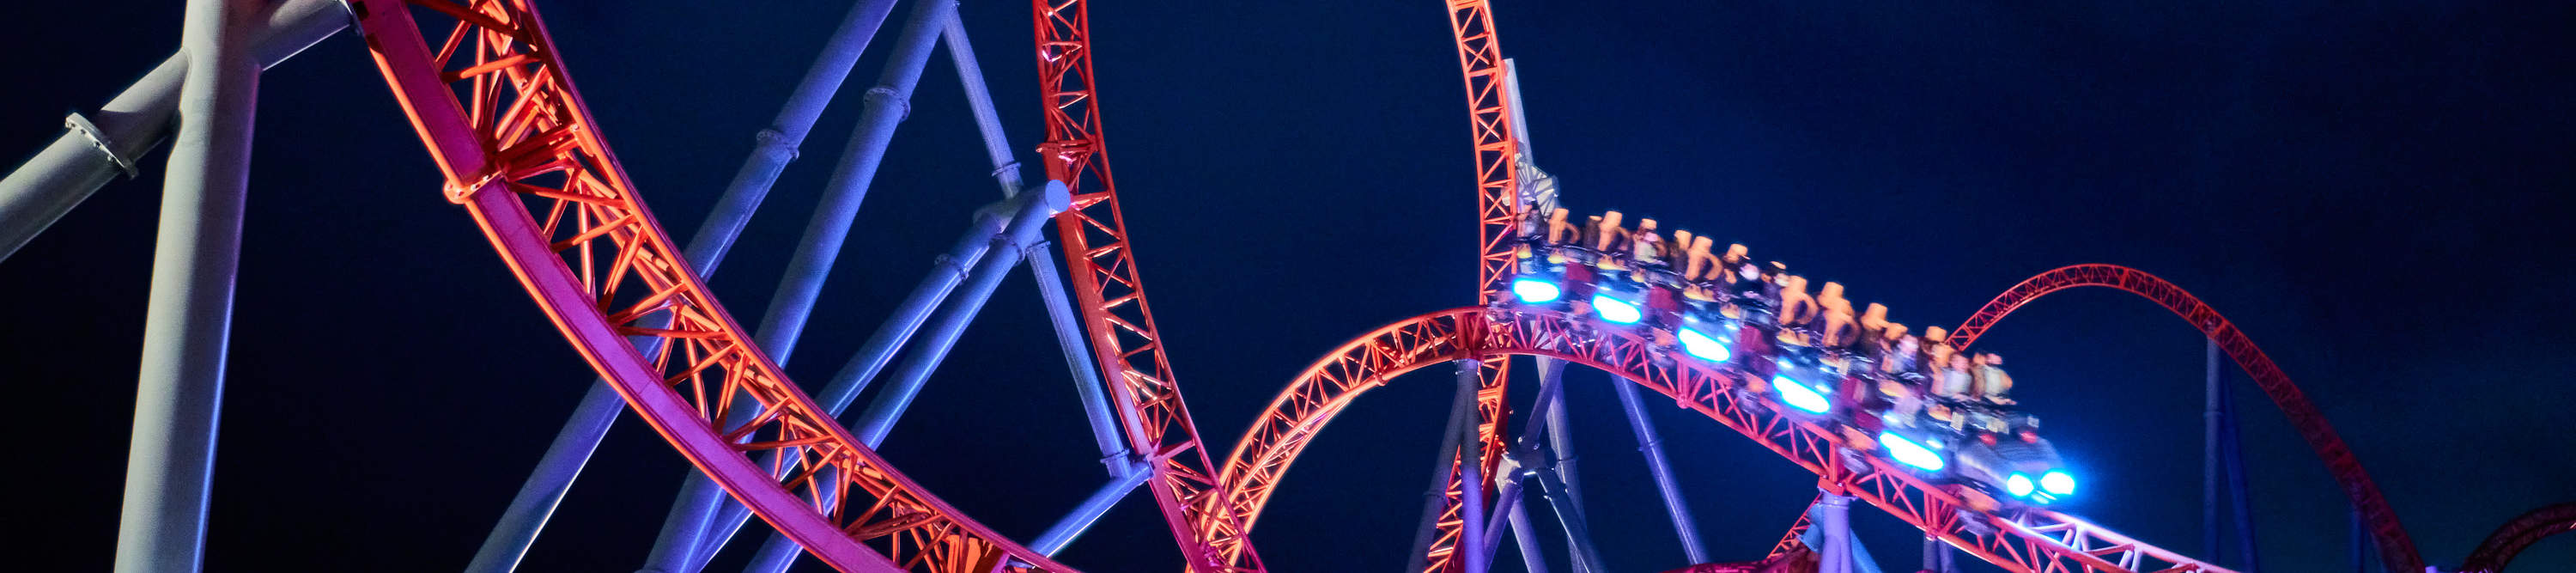 Night view of Roller Coaster